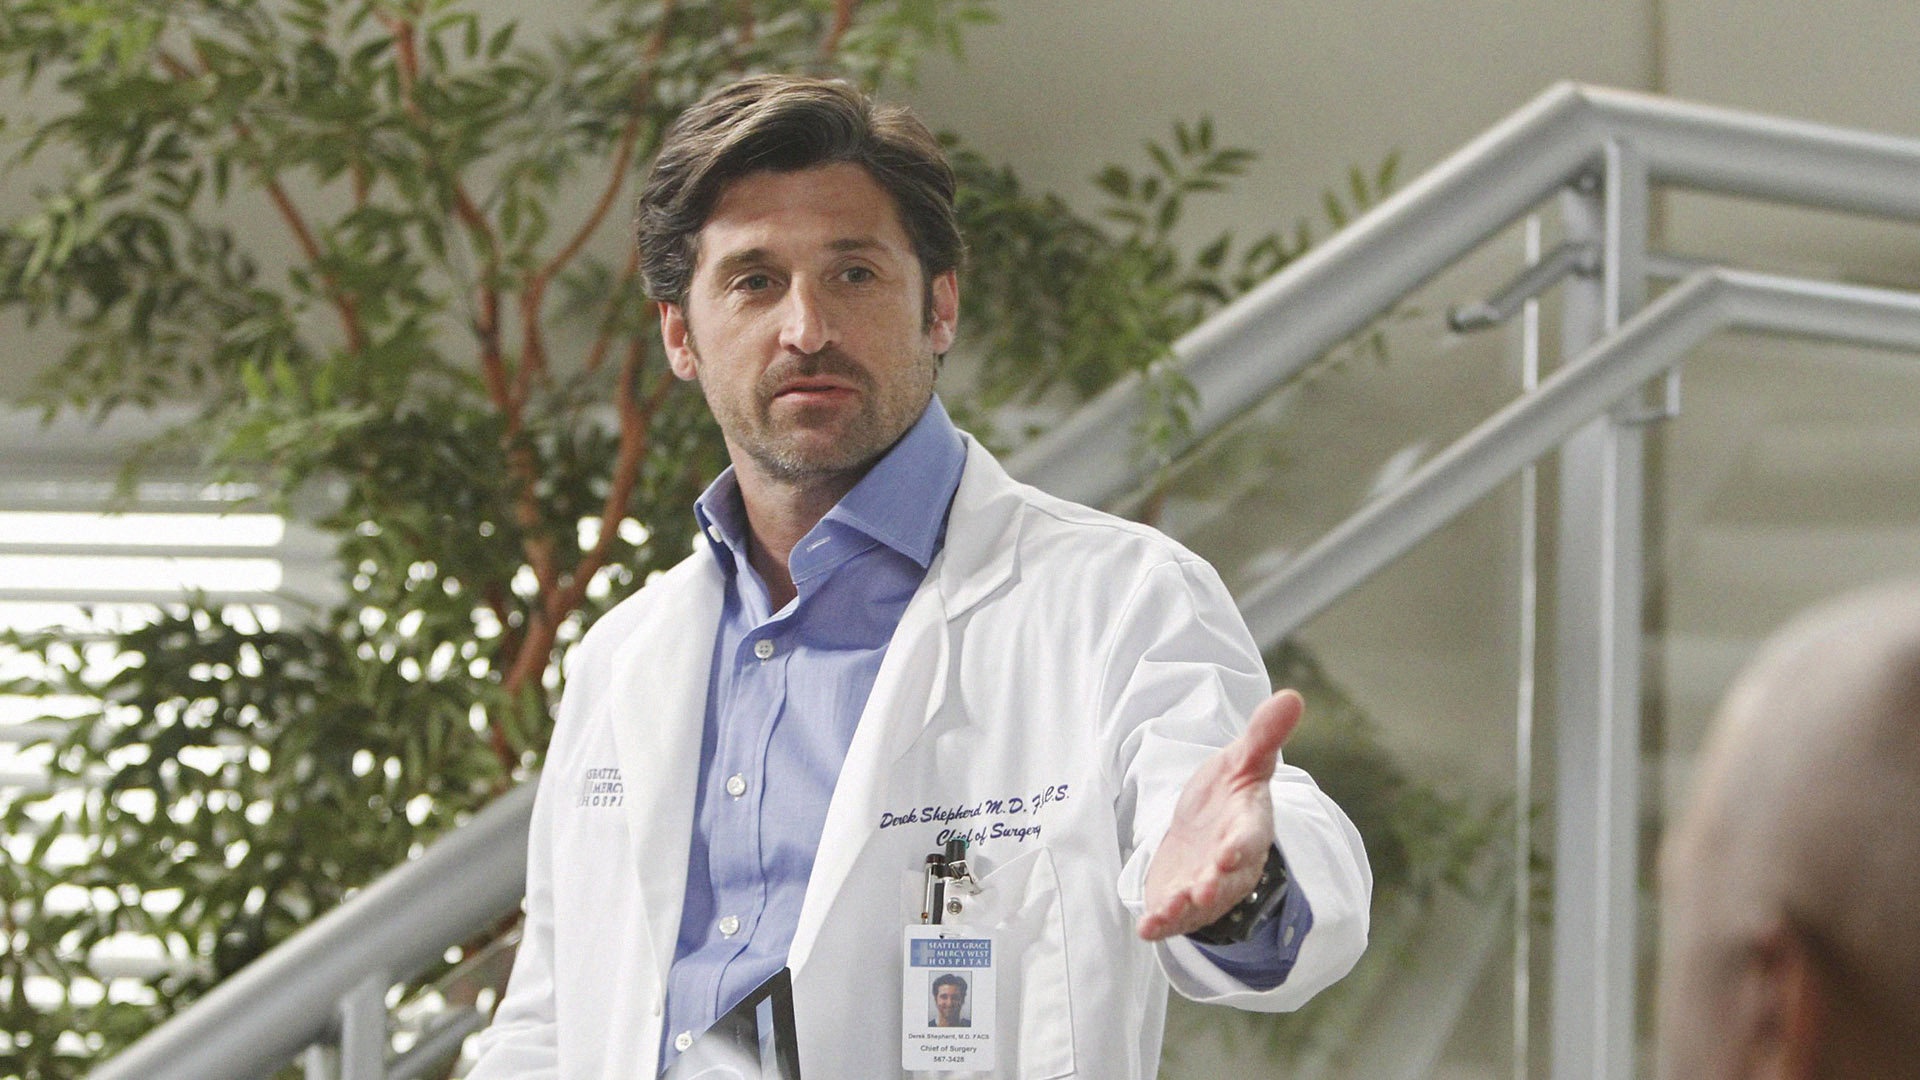 Where Are They Now? Top 7 Sexiest Doctors On TV